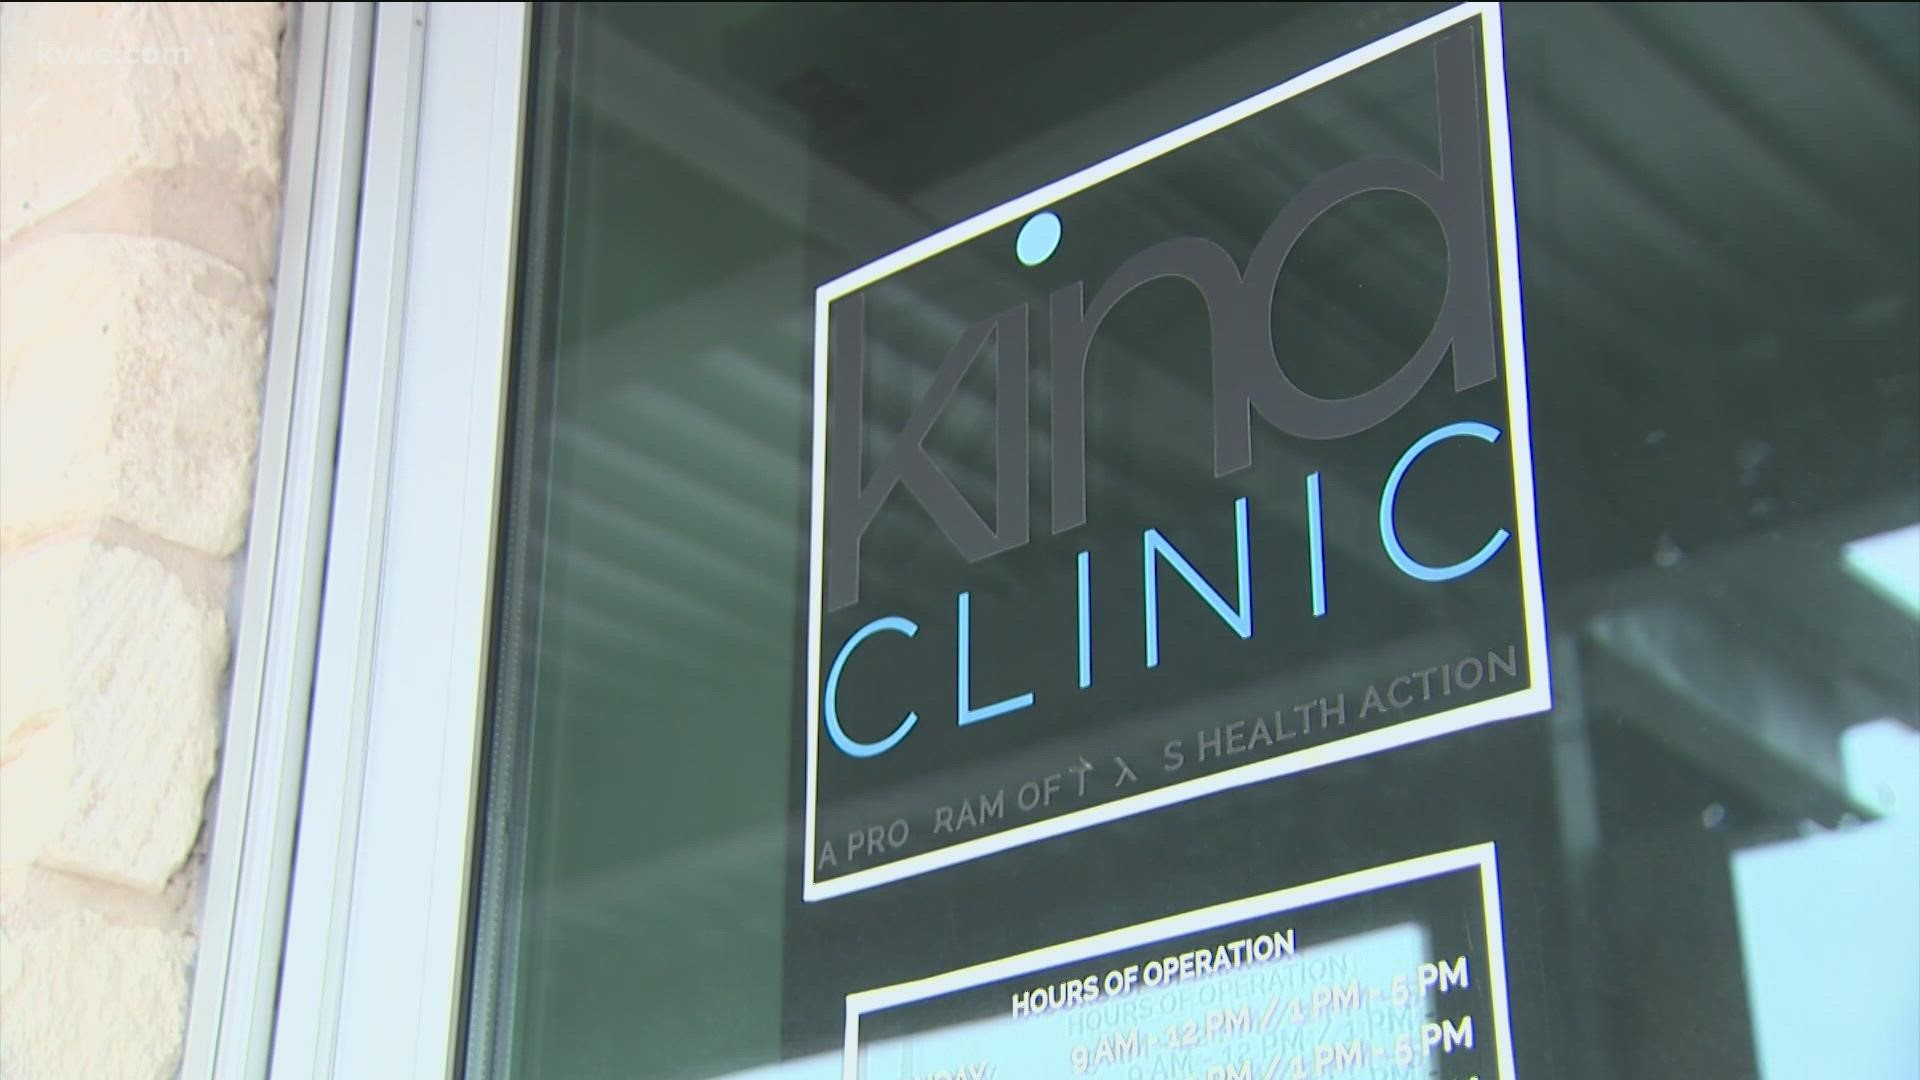 The Kind Clinic, a sexual health clinic in Austin, is working to make it easier for people to get connected to STI testing and other health resources.